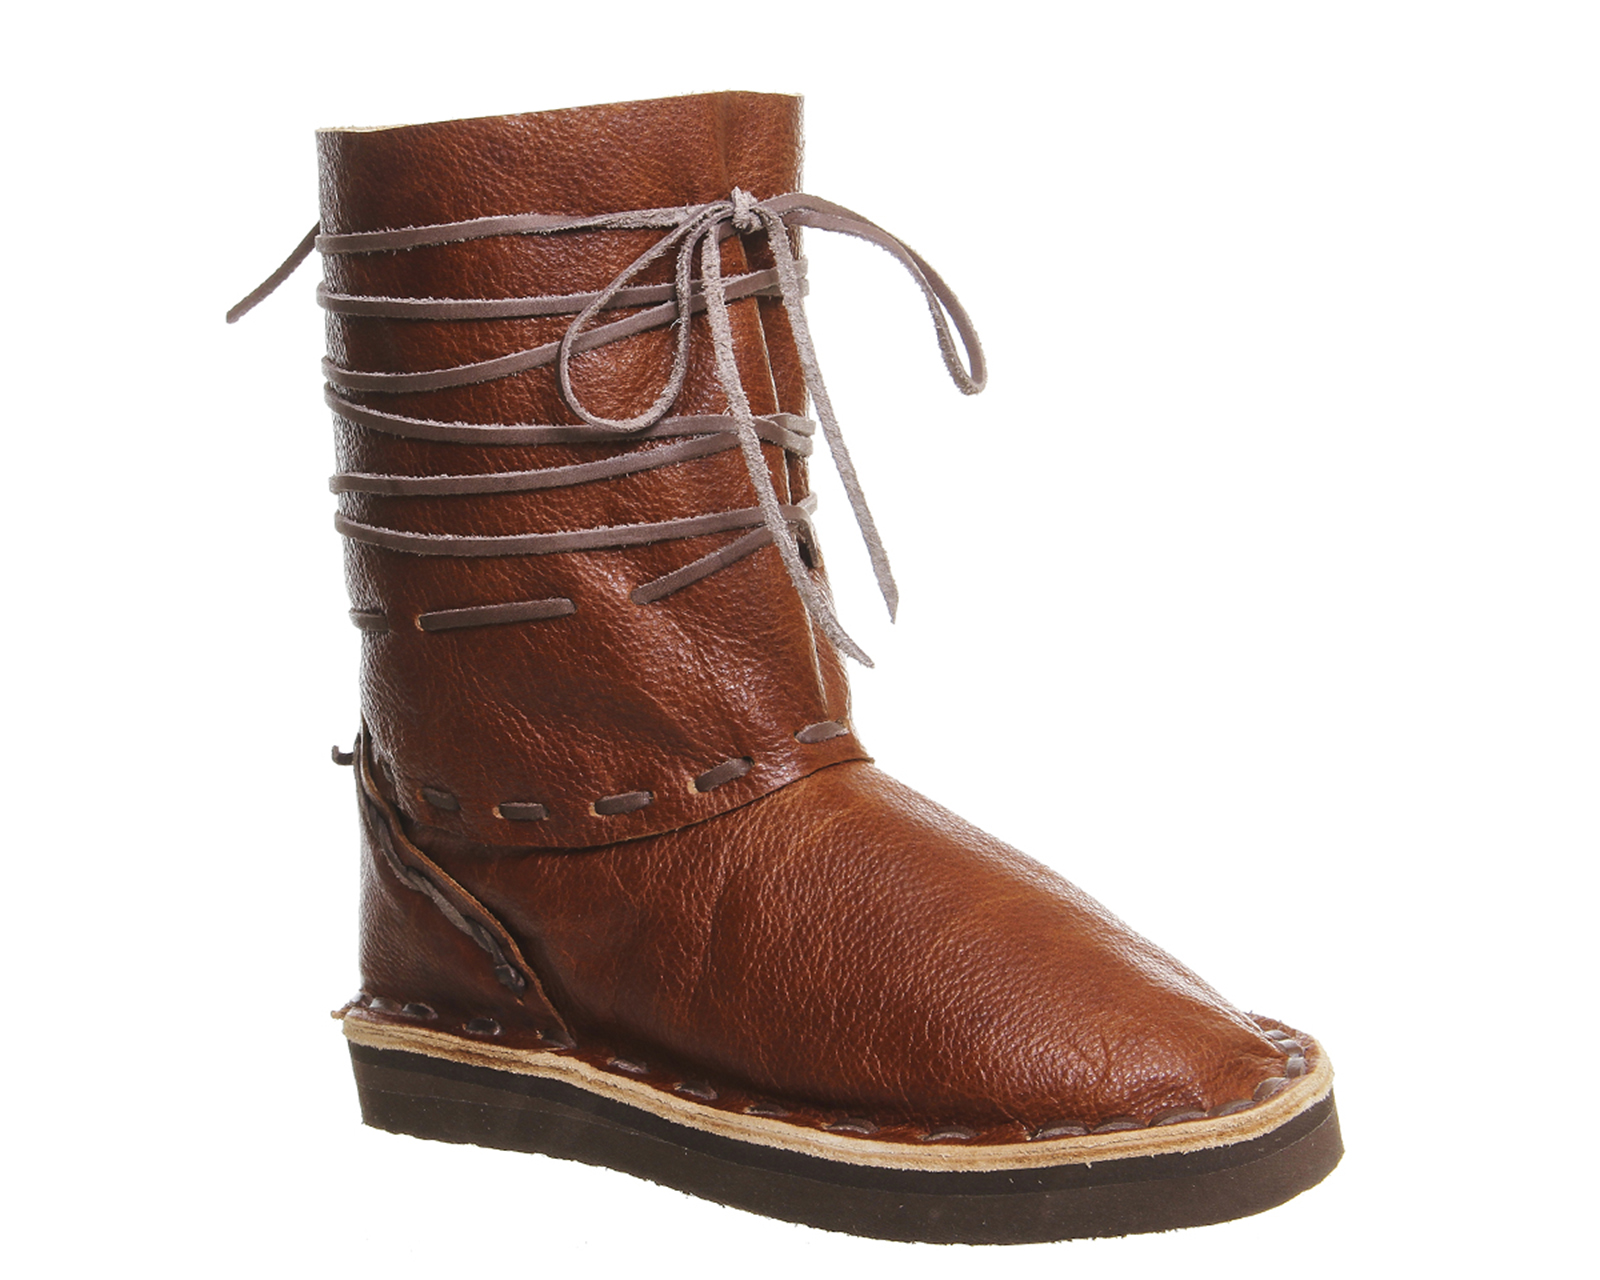 ChamulaVw BootsBrown Leather